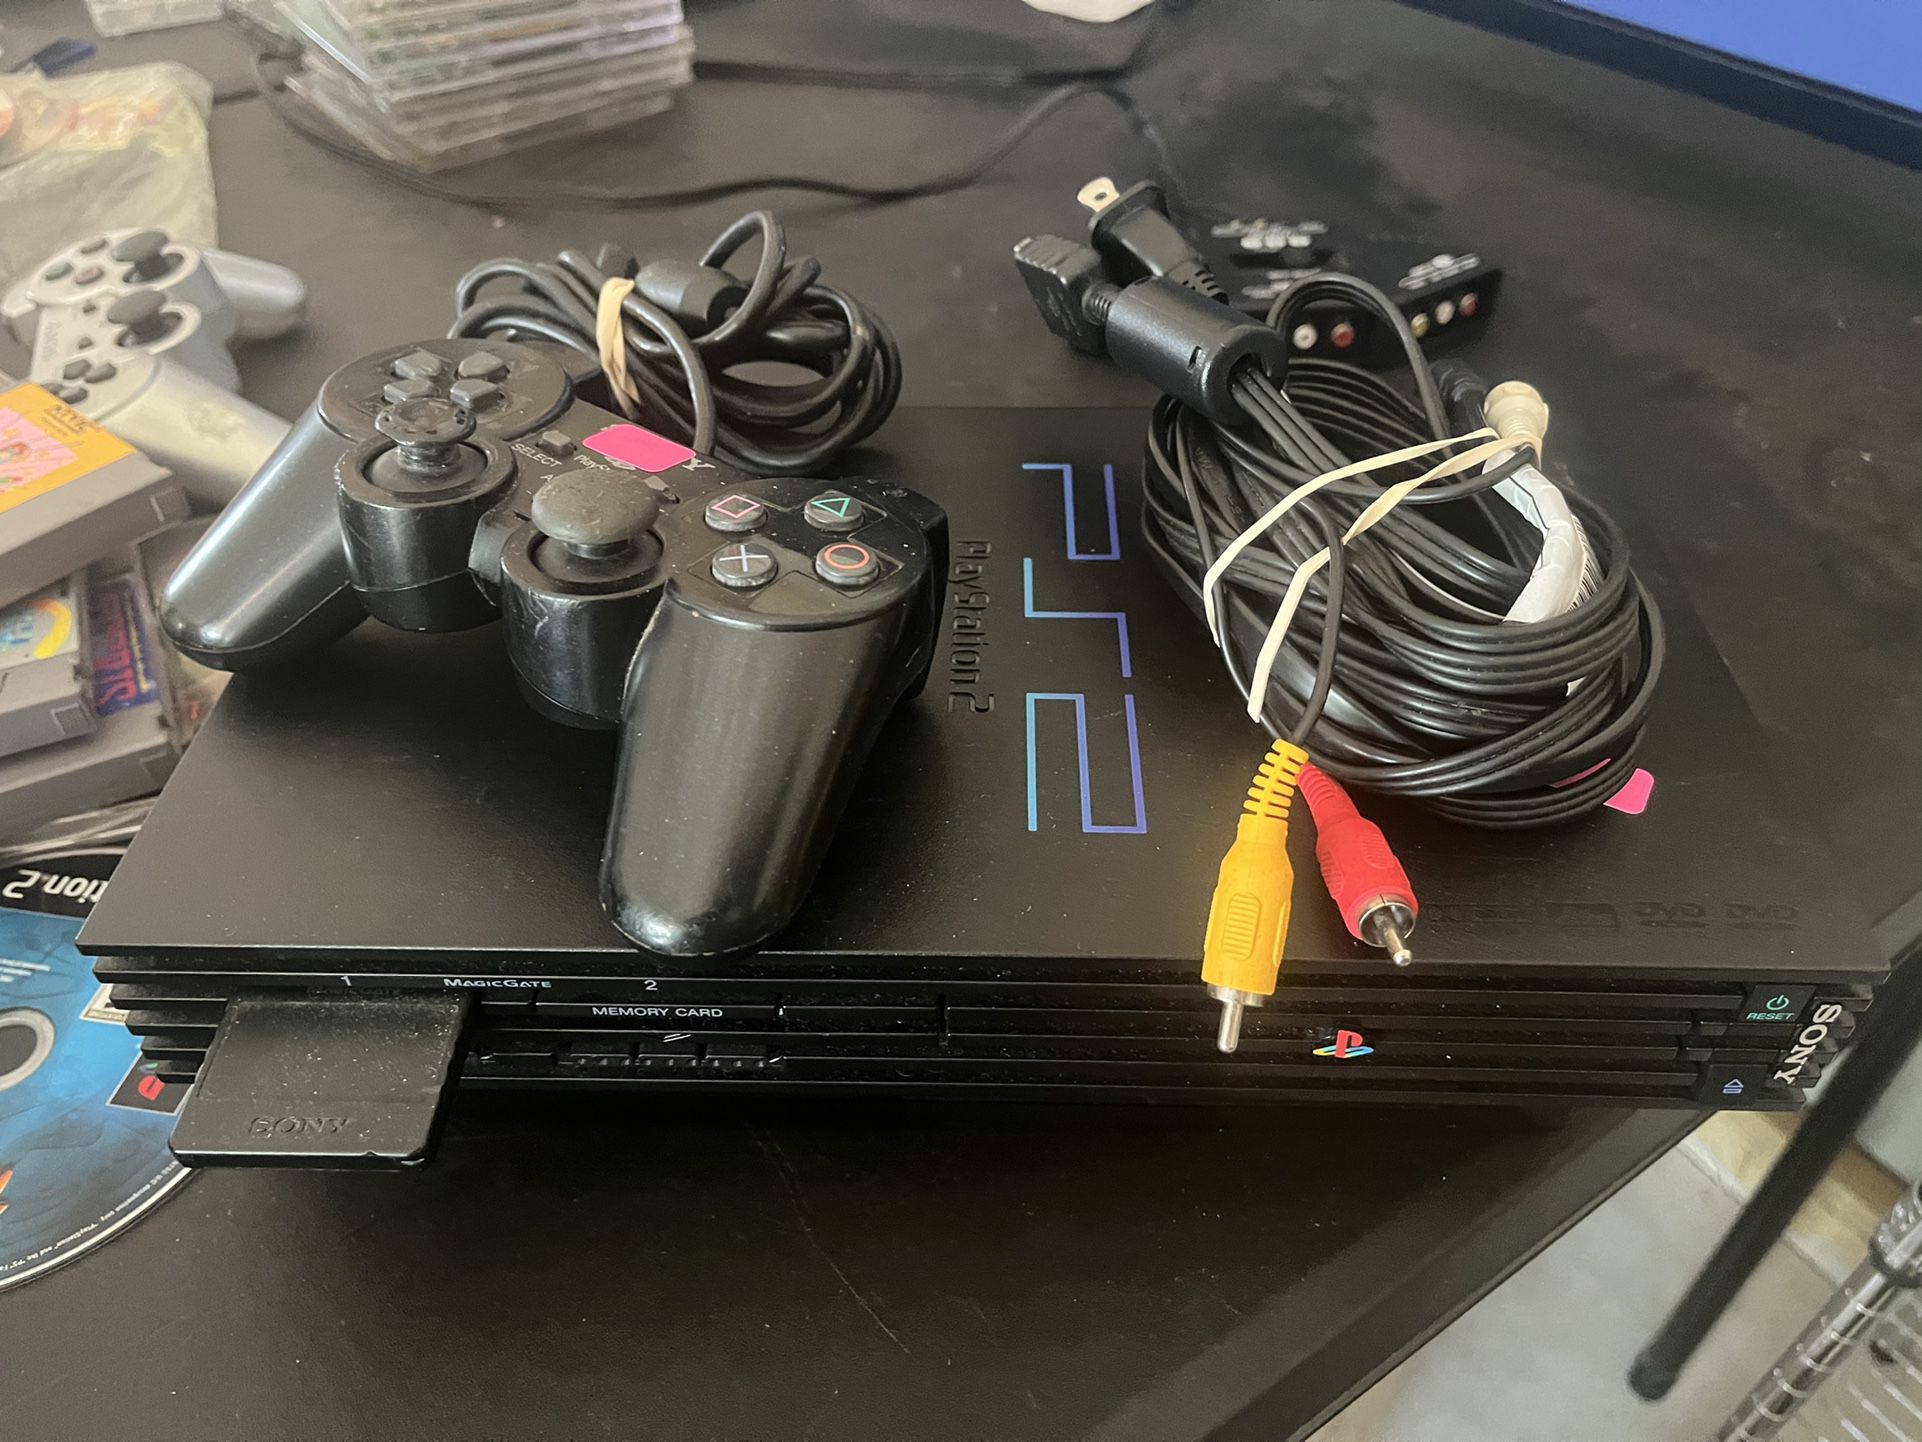 PlayStation 2 Console 